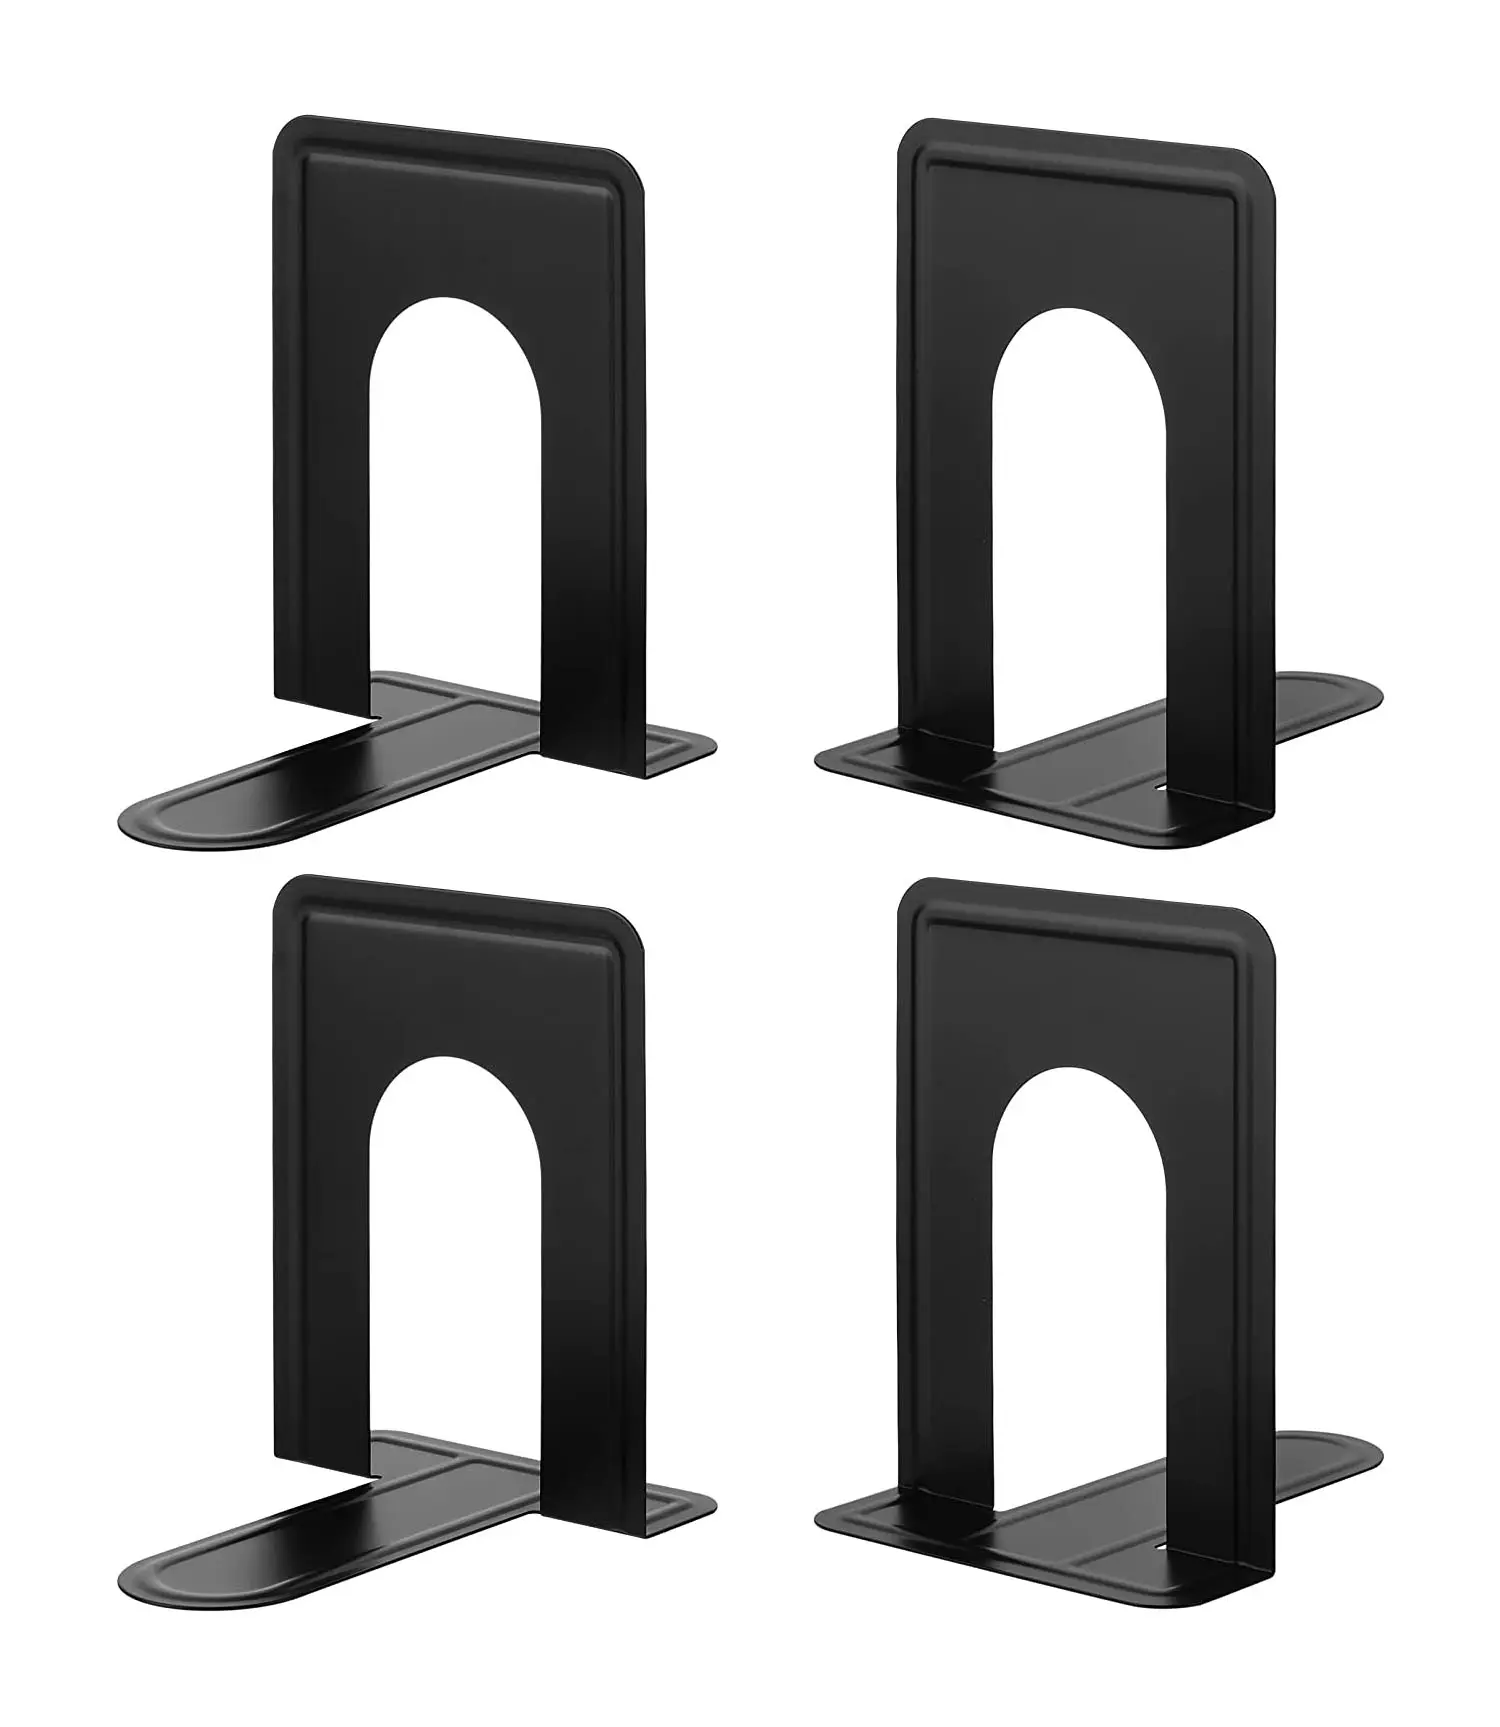 Bview Art Heavy Duty Black Metal Book Holders Ends For Shelves Book Stoppers